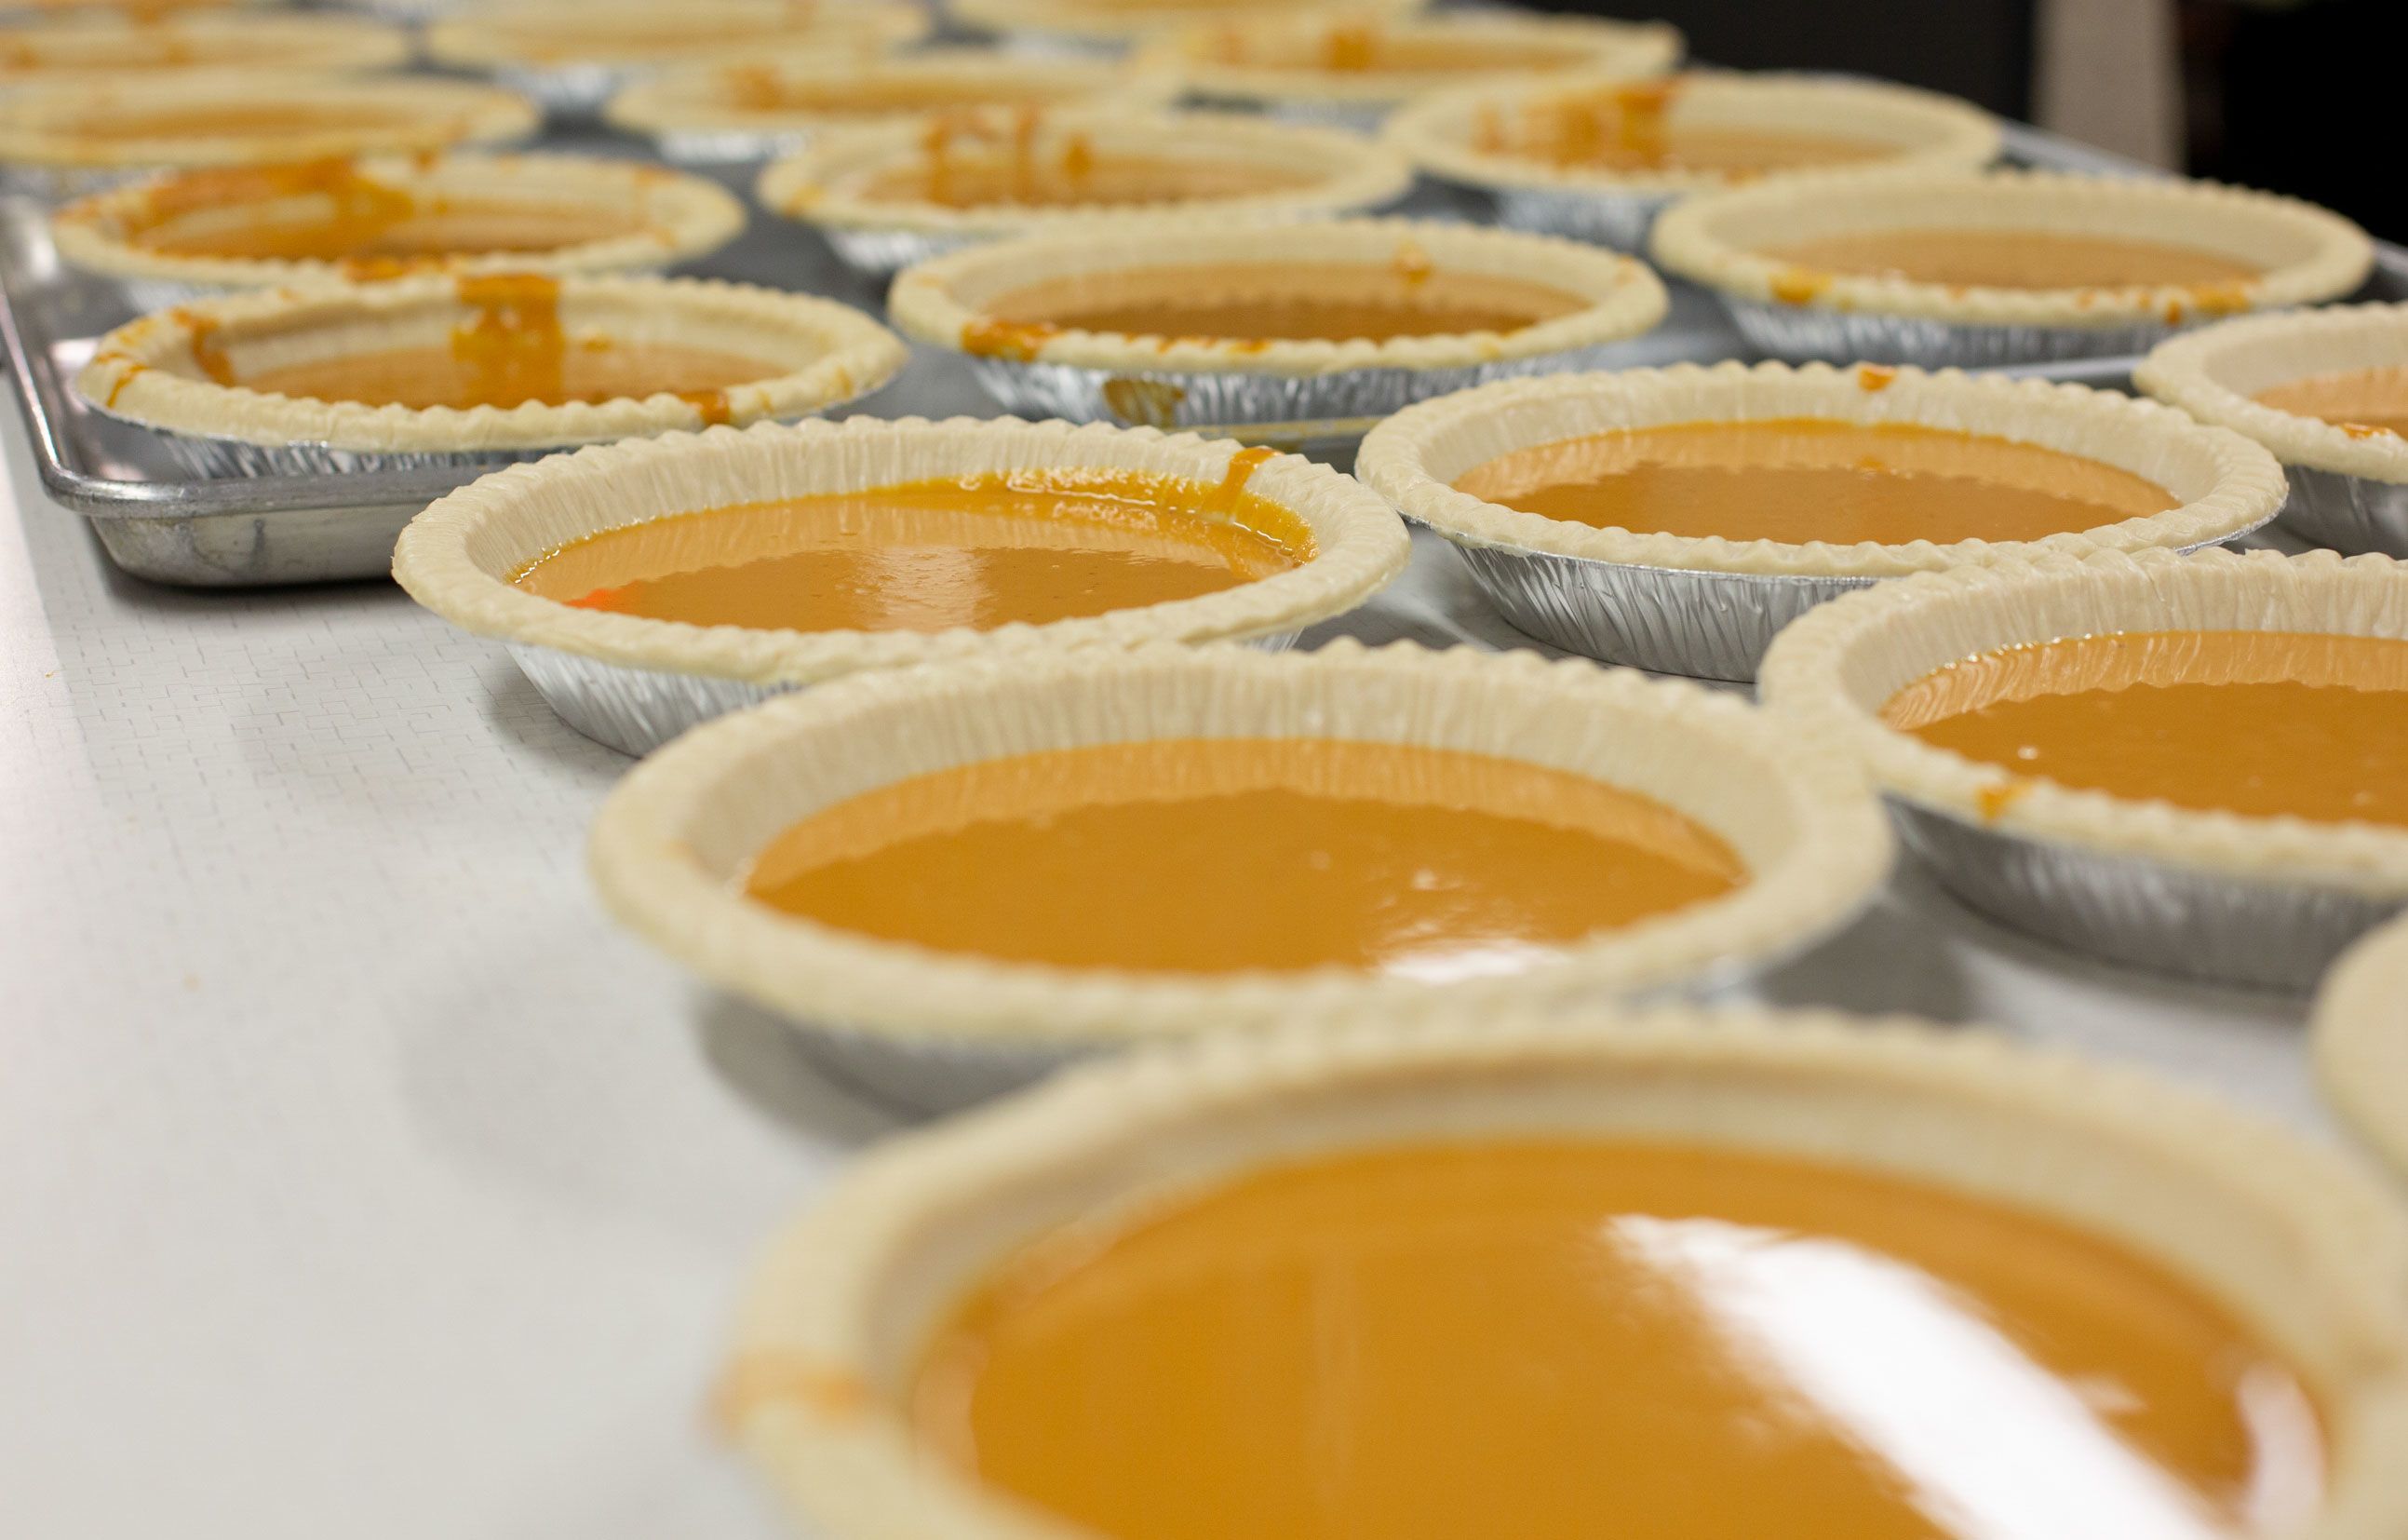 Pies are seen before getting baked at Robert F. Wagner Middle School in New York City, on November 18.